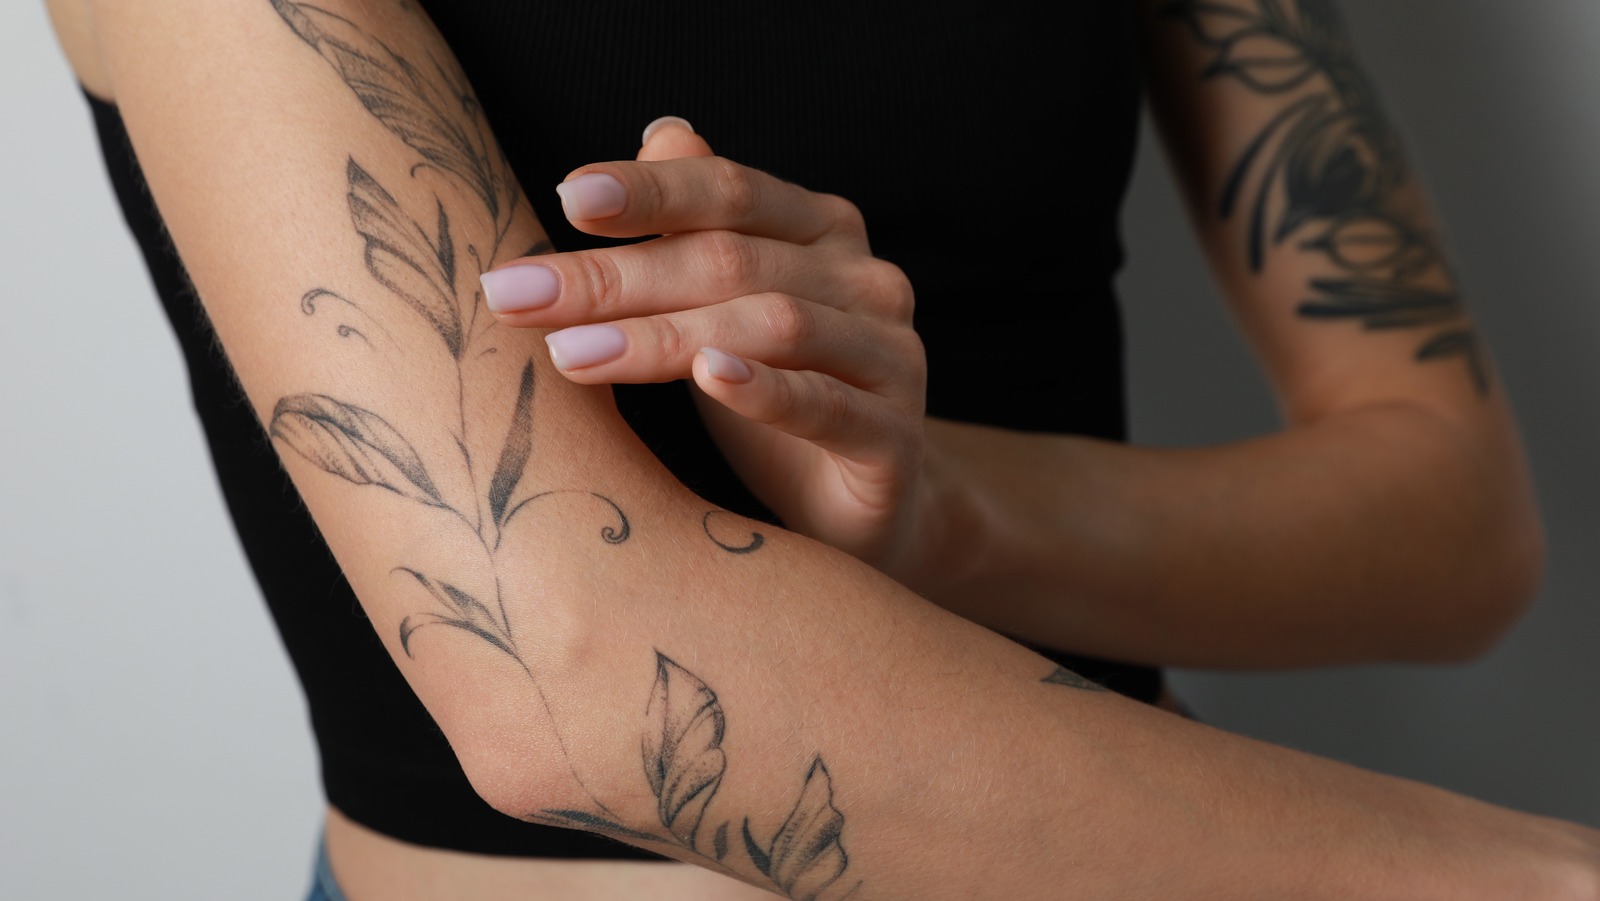 20 Best Places to Get a Tattoo and Their Meanings  Wild Tattoo Art